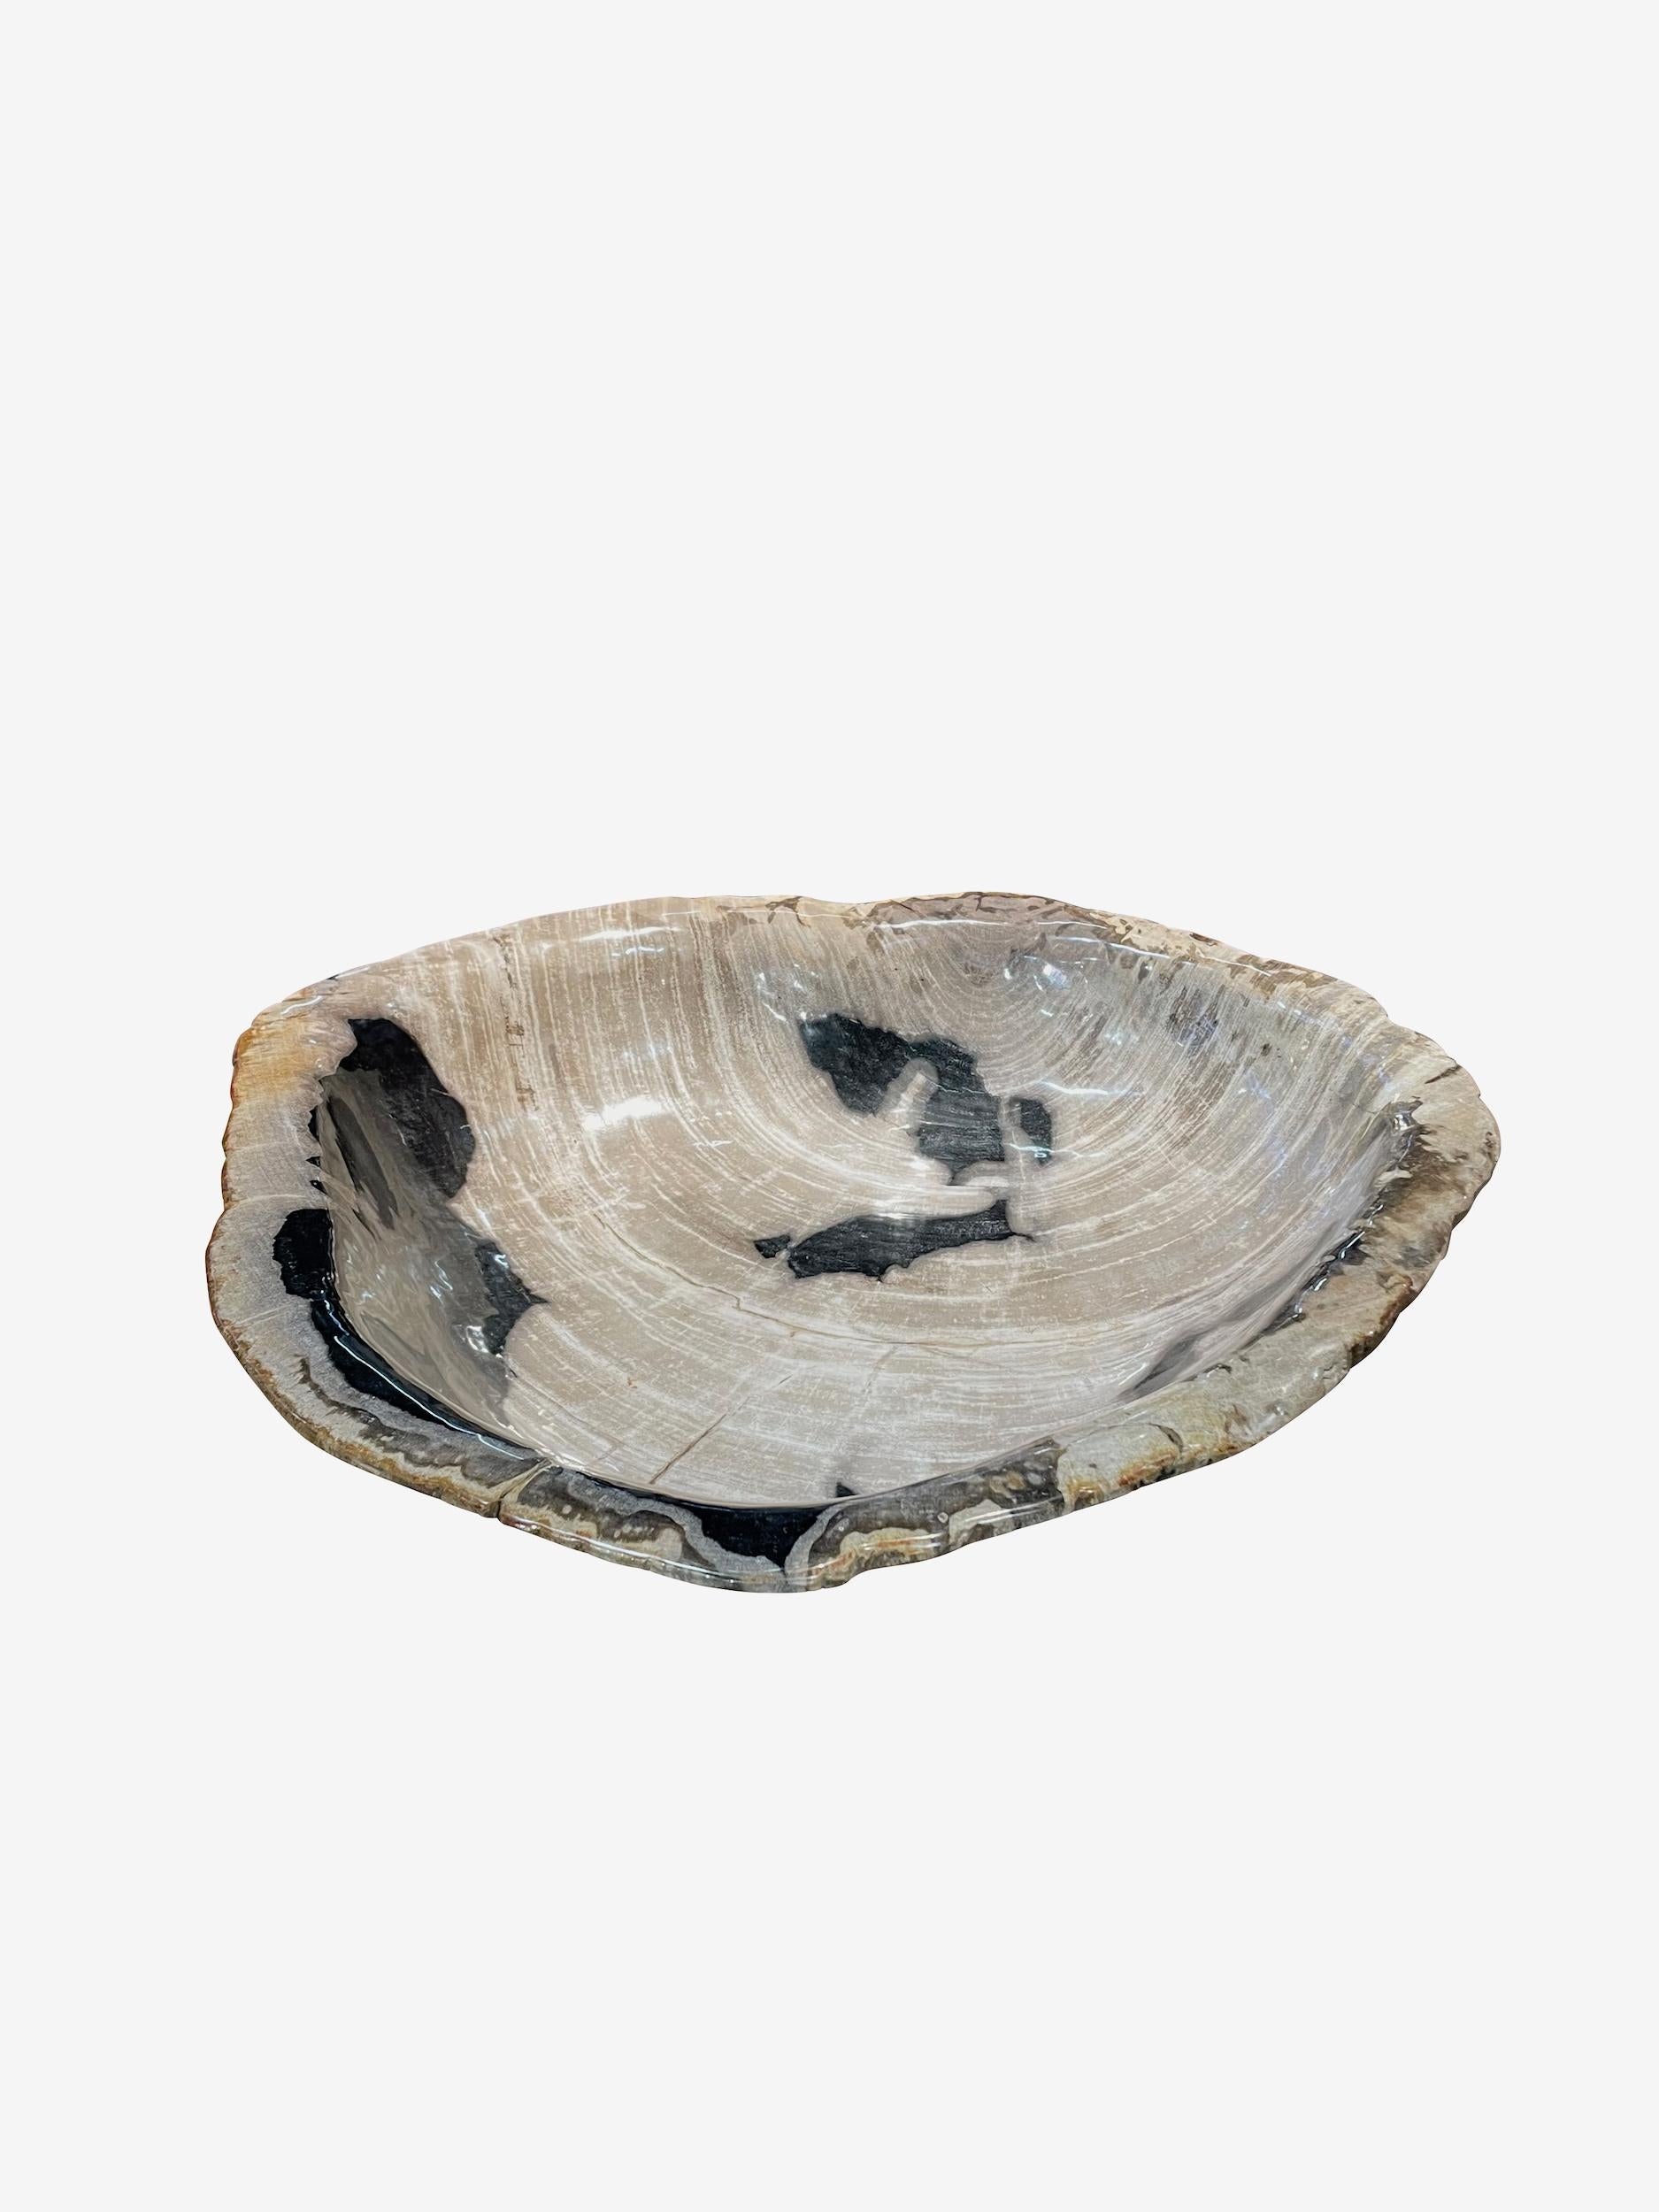 Contemporary Indonesian large petrified wood bowl.
Free form organic in shape.
Cream, black, and taupe in color.
Polished.
From a large collection of bowls, plates and platters.
          